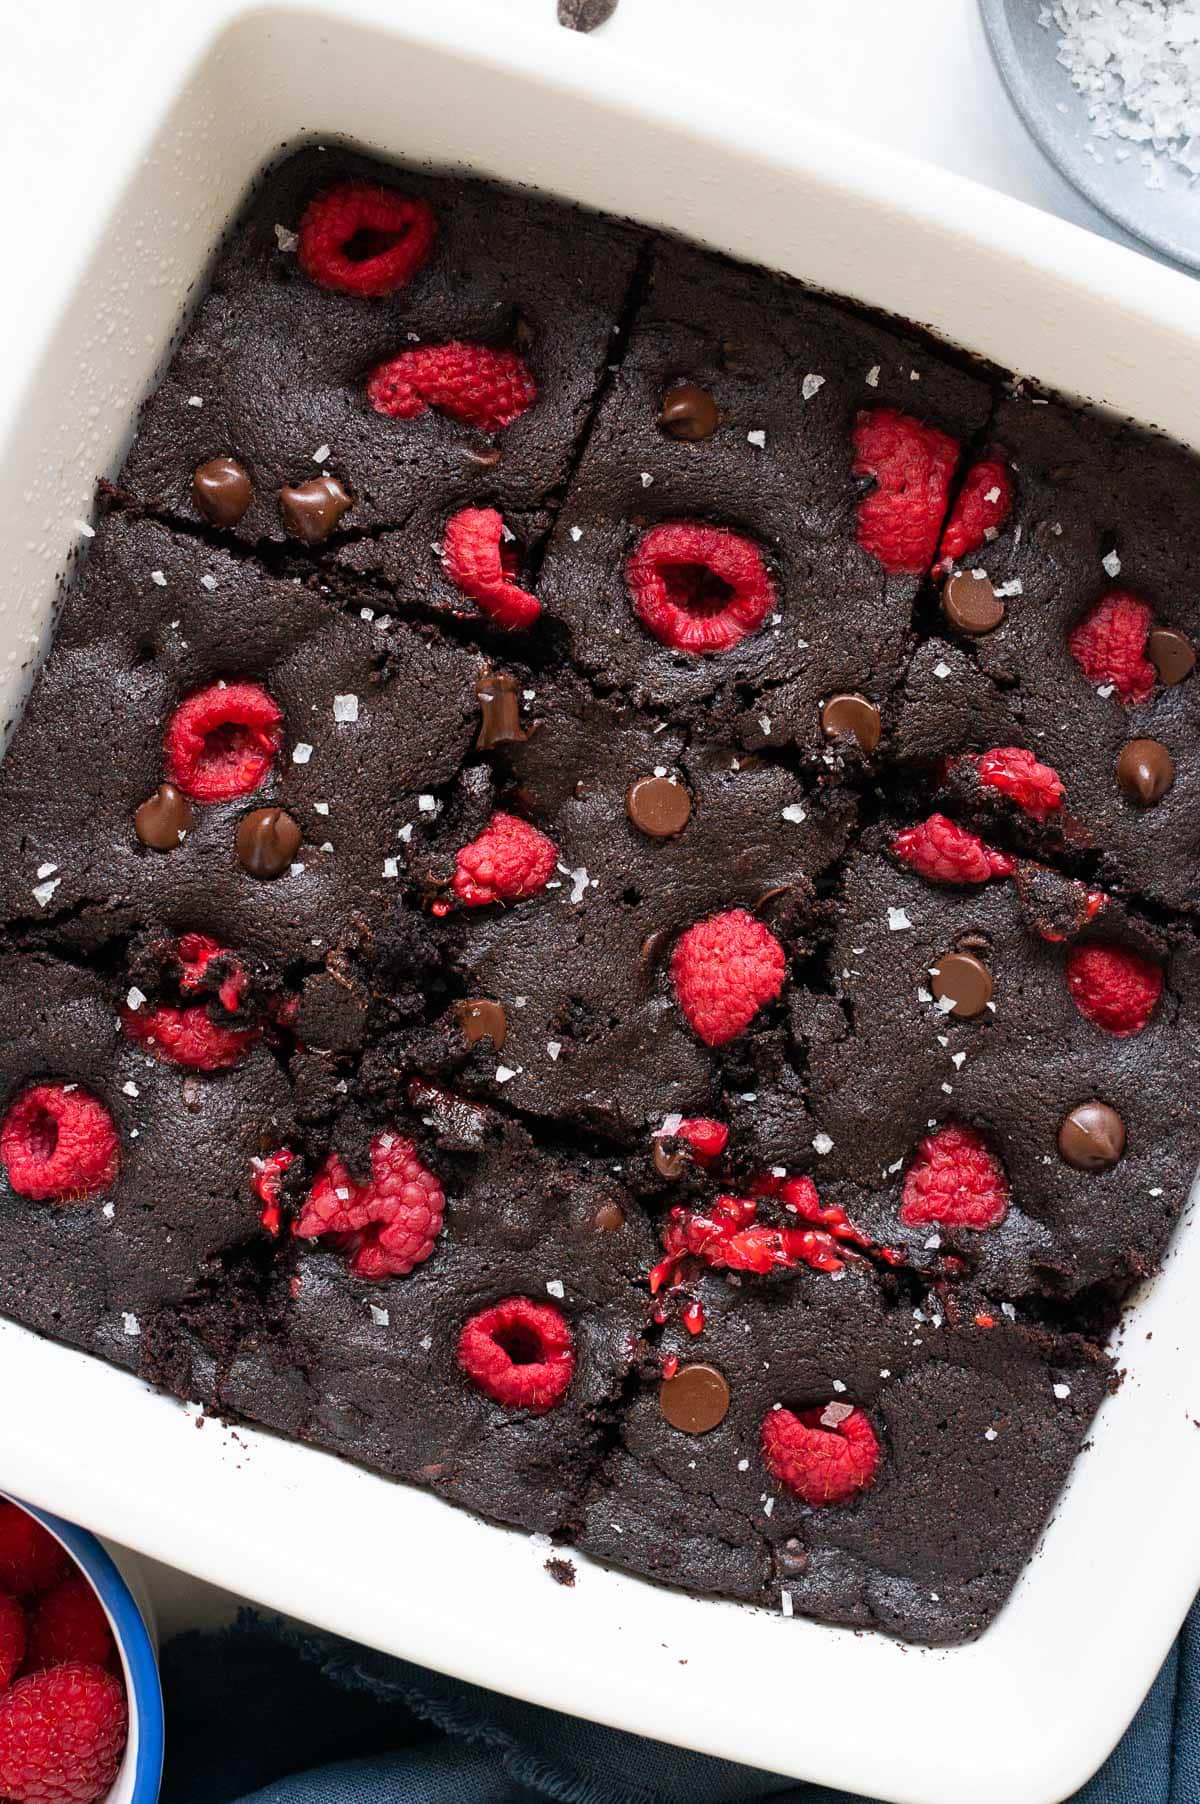 Close up off brownies with raspberries, chocolate chips and sprinkled with sea salt flakes.